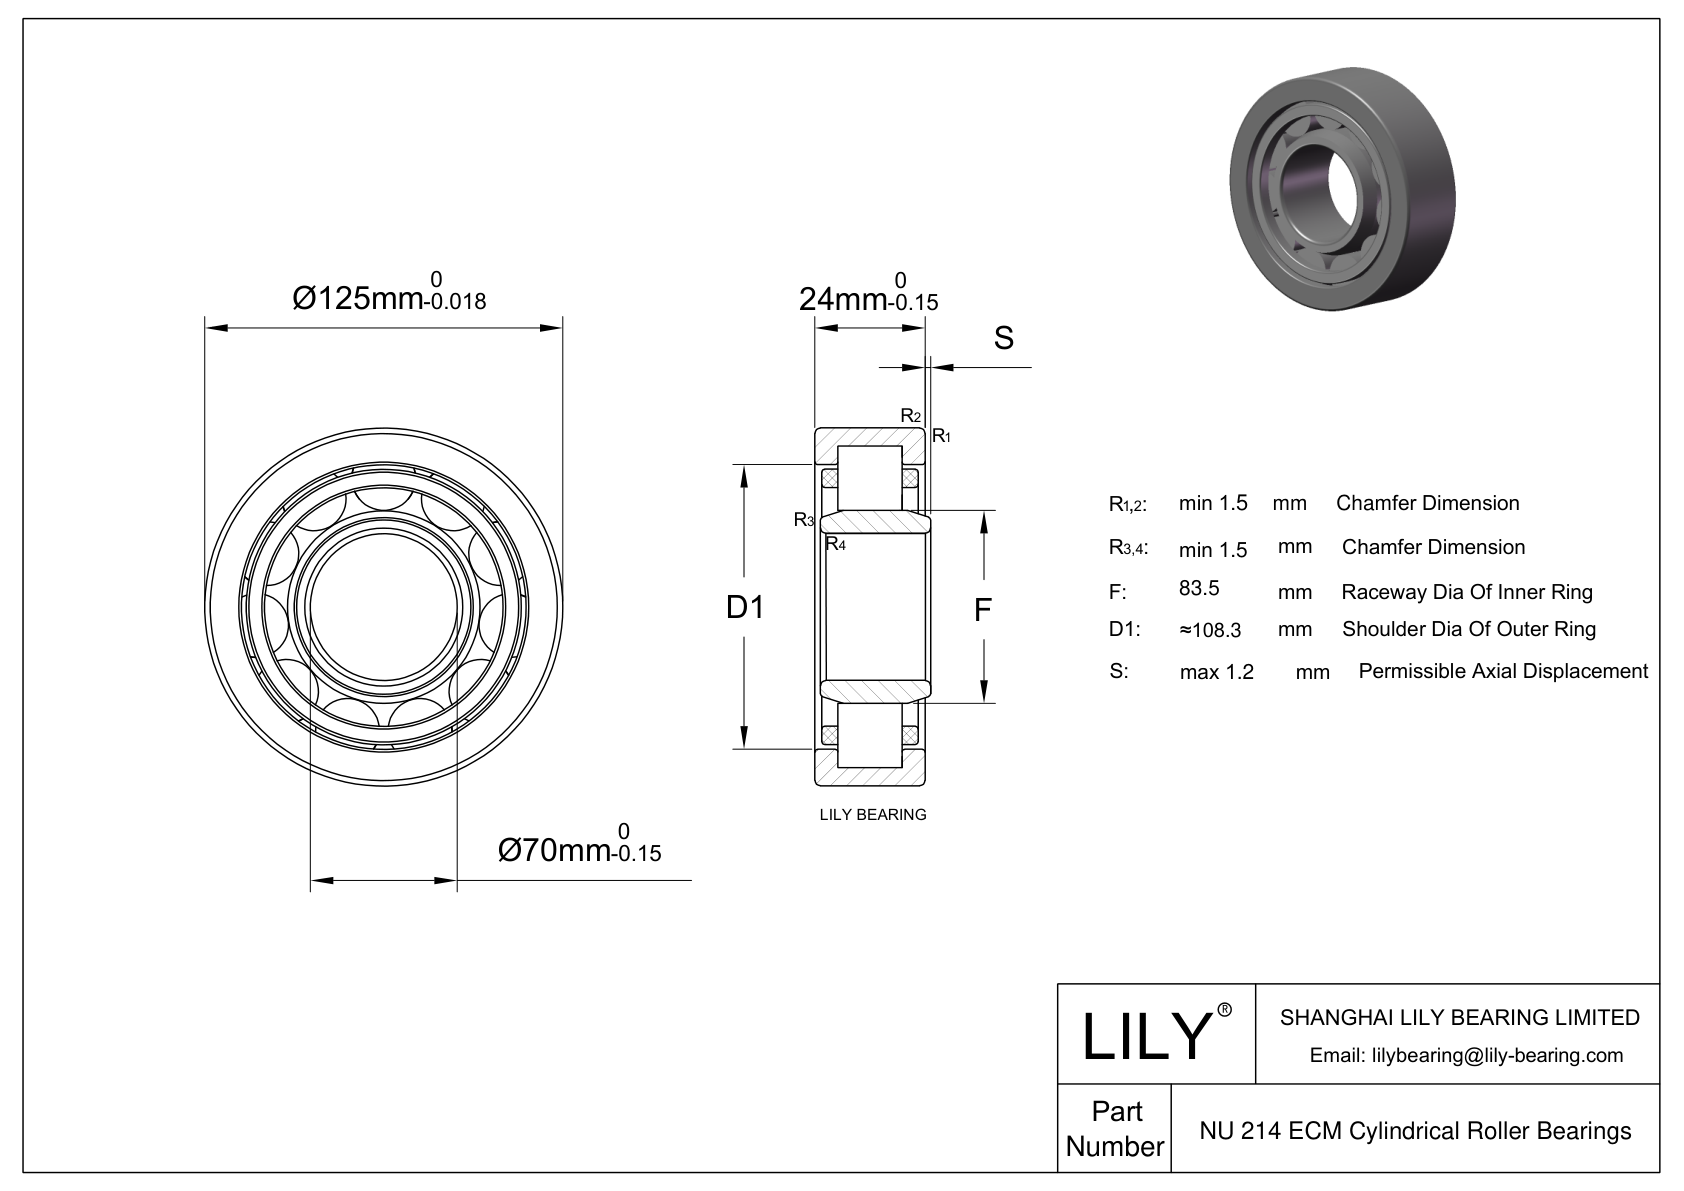 NU 214 ECM/C3VL0241 Ceramic Coated Cylindrical Roller Bearings cad drawing